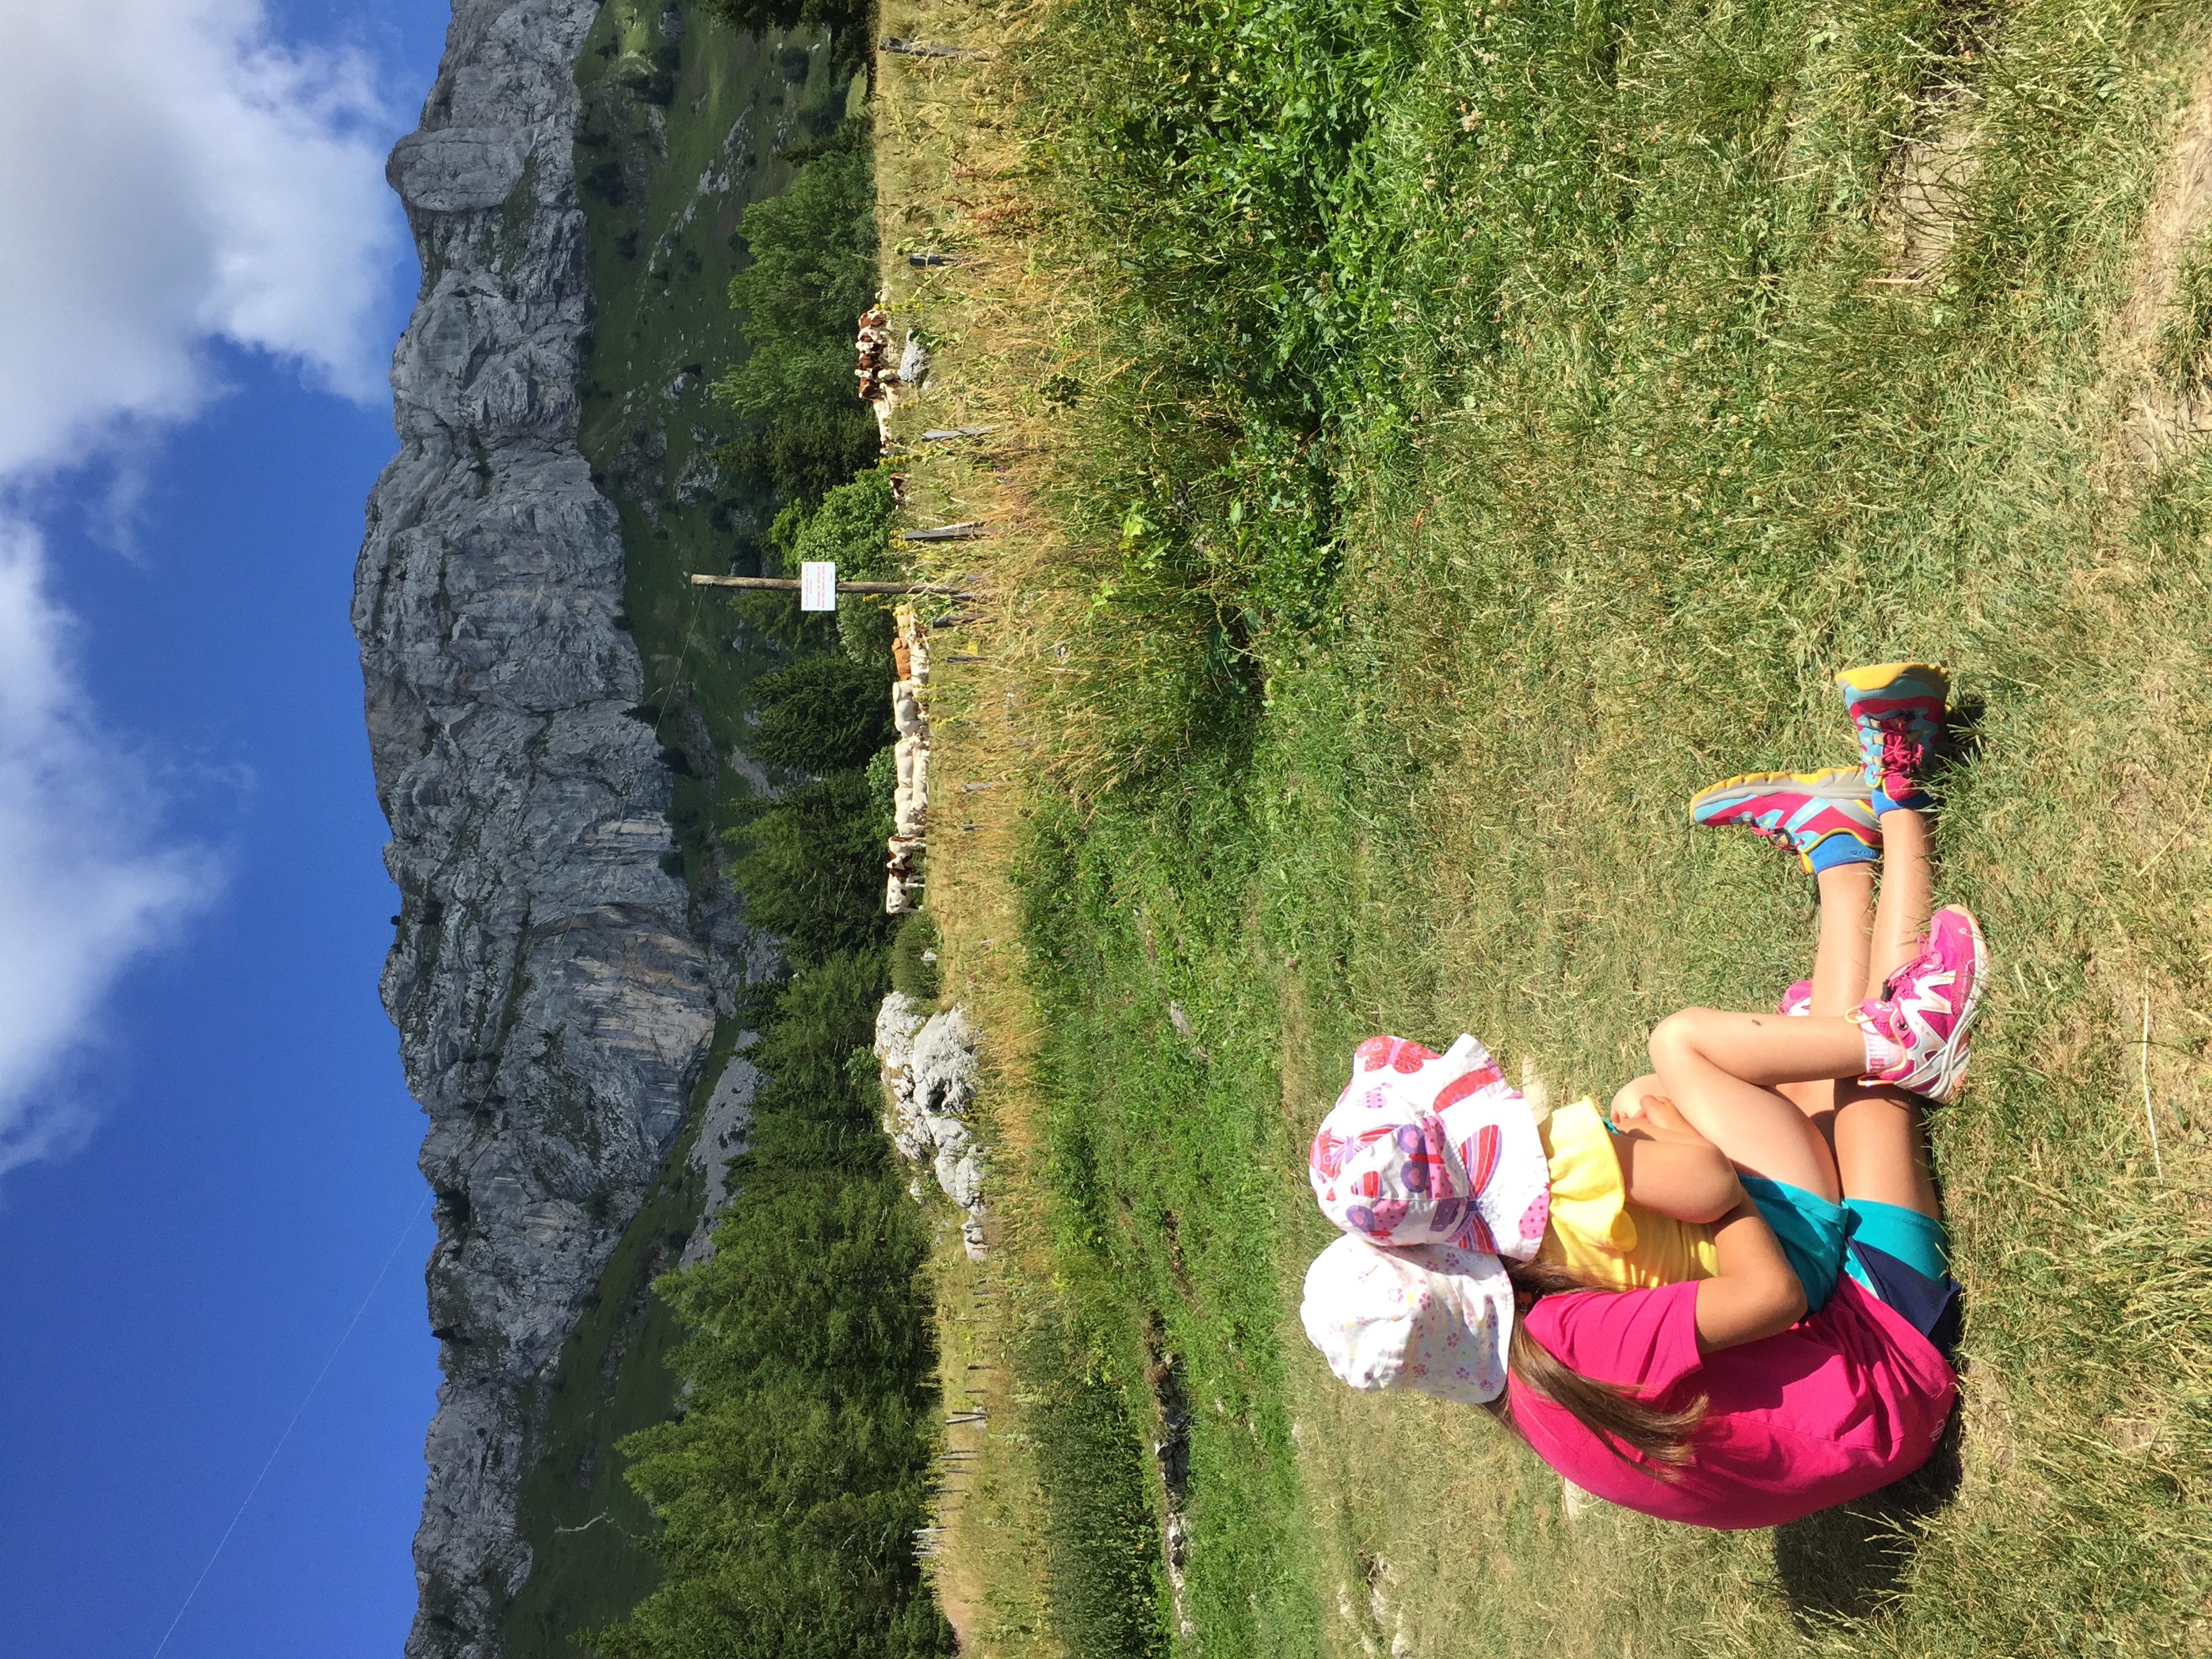 Our ambassadors June and Tess in Vercors mountains